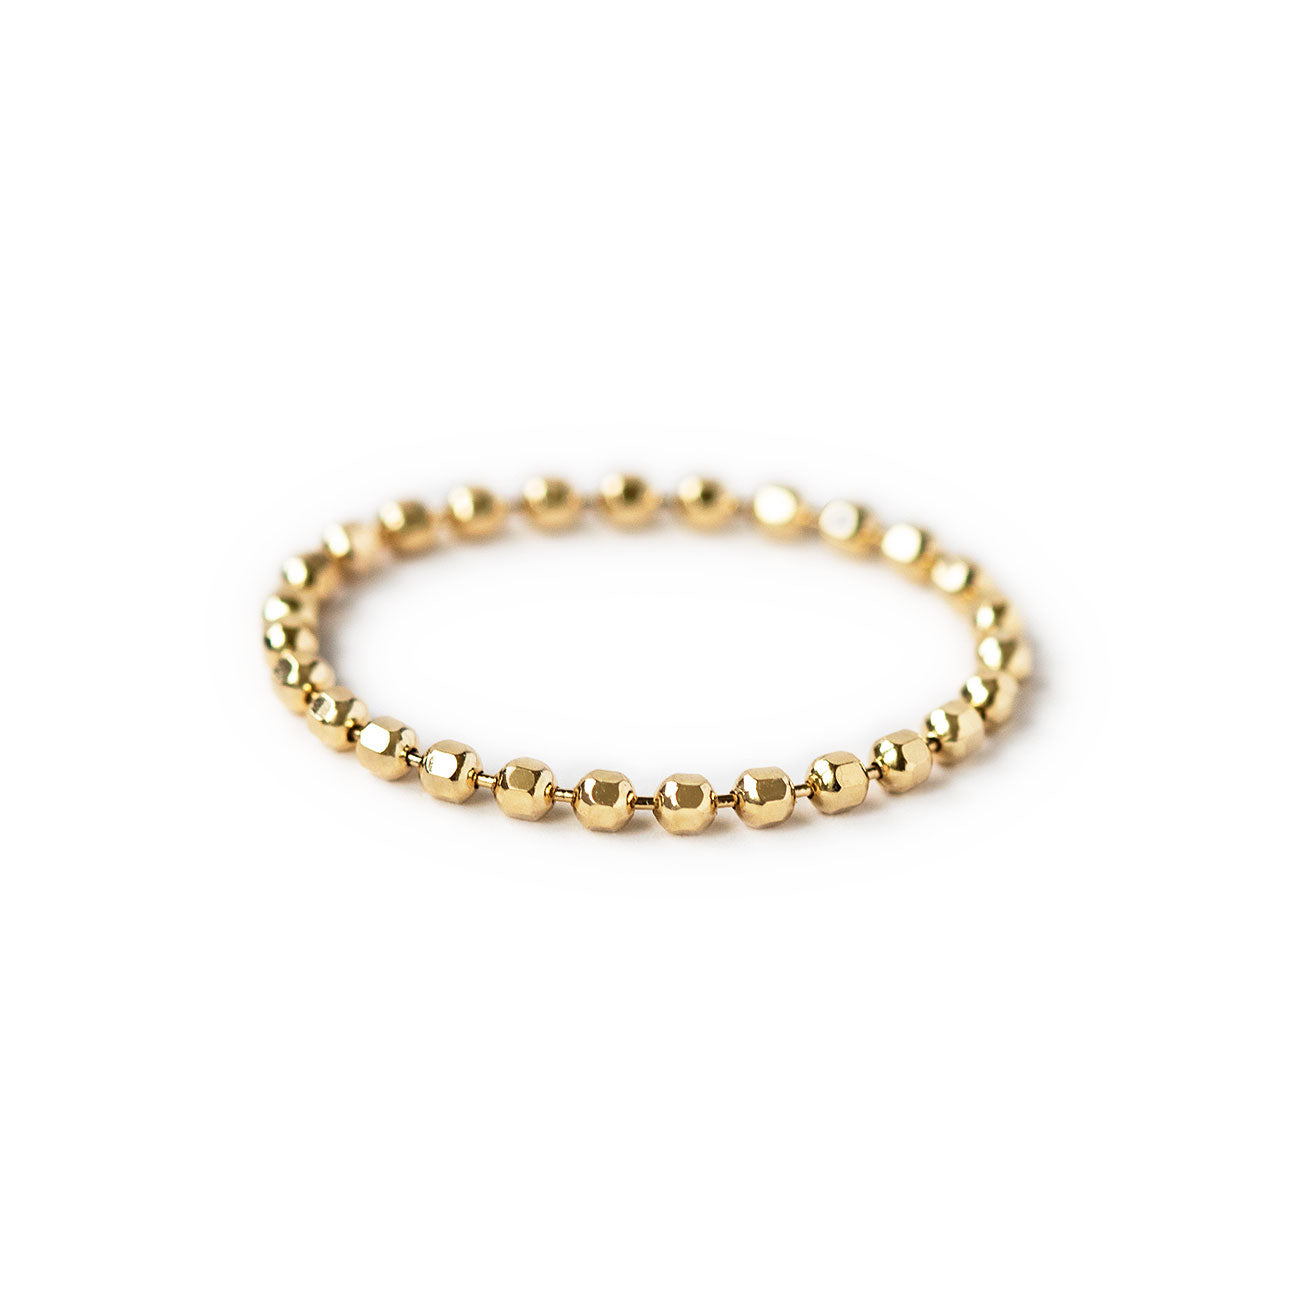 Gold Chain Ring- 14K Solid Gold Ring, Dainty Gold Chain Ring, Chain Ring 6